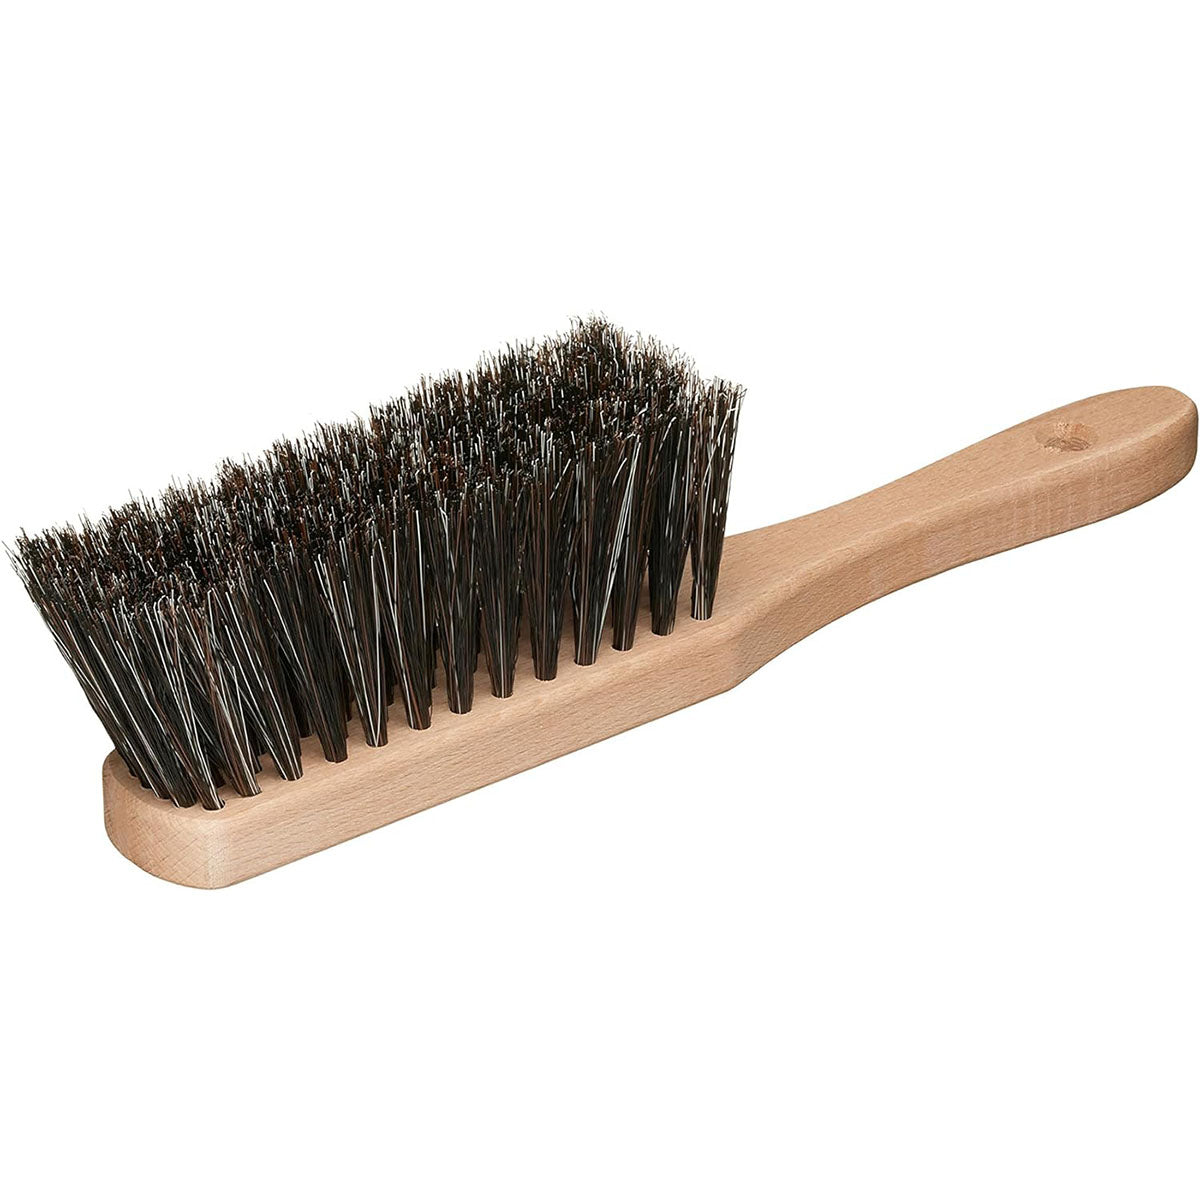 11.2" Hand Broom Soft Bristles Cleaning Brush, Dusting Brush with Wooden Handle